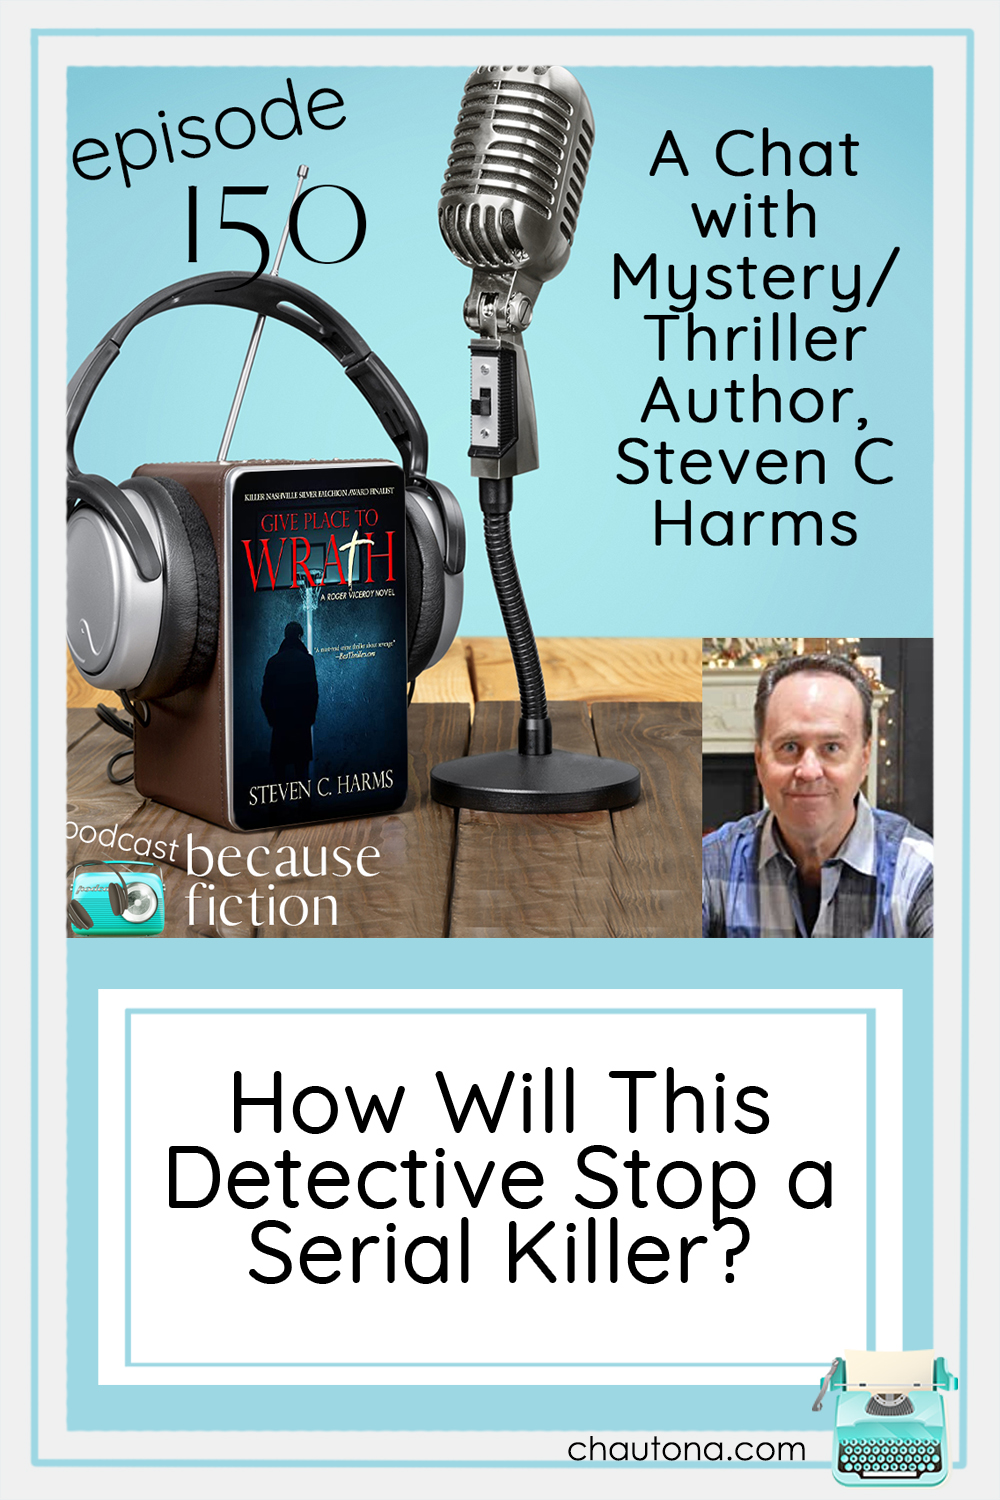 From exploding golf clubs or searching Guatemala for the long-missing son of a senator, Steven C. Harms has a book for you! via @chautonahavig